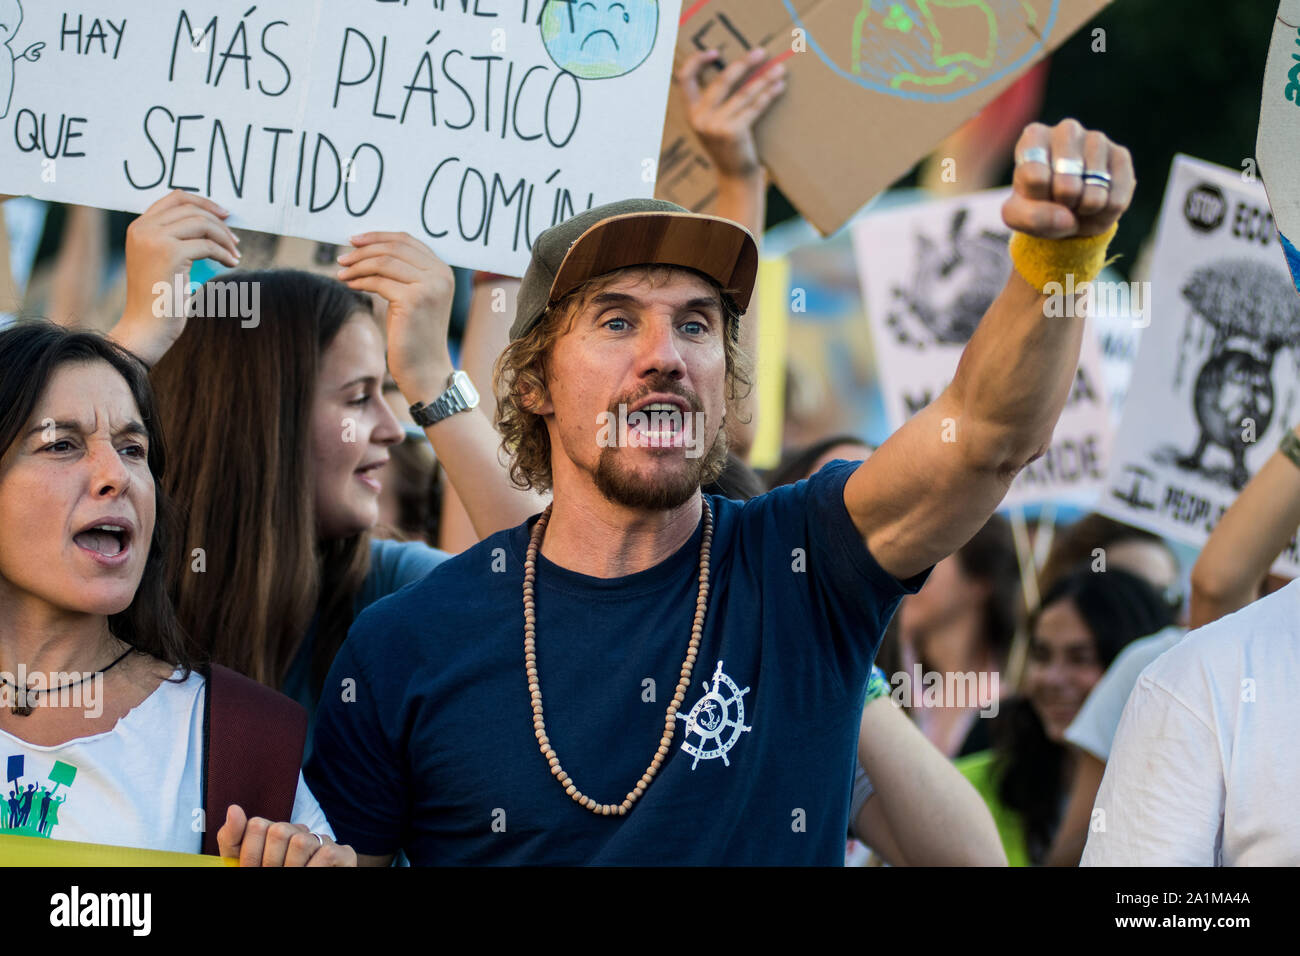 Madrid, Spain. 27th September, 2019. Spanish musician Macaco supporting a global climate strike demonstration taking place at the end of a global climate change week. Credit: Marcos del Mazo/Alamy Live News Stock Photo